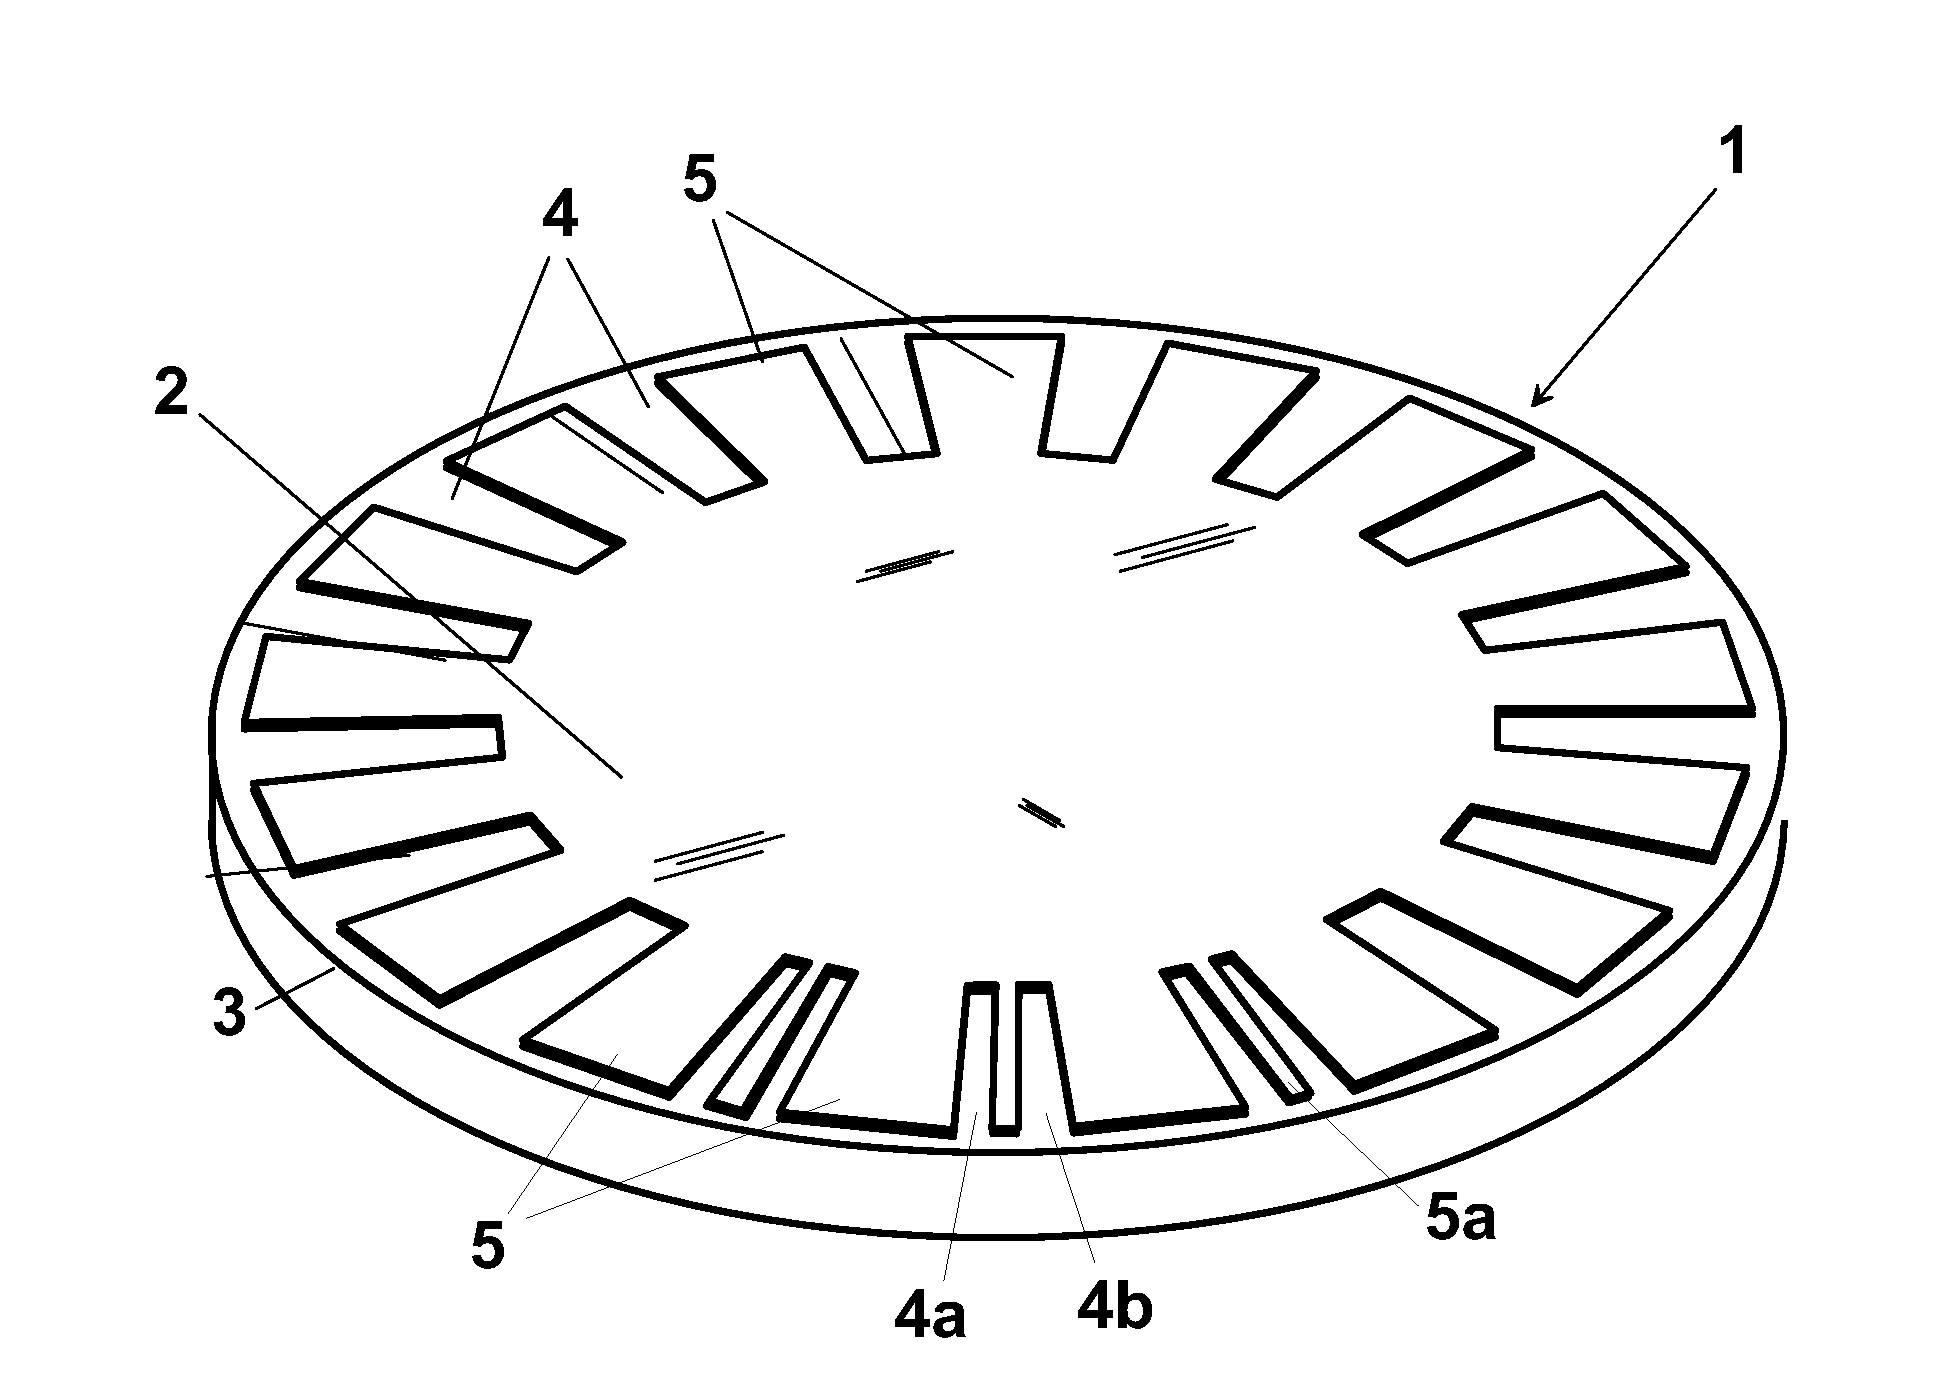 Circular semiconductor lasers having lattices for vertical emission